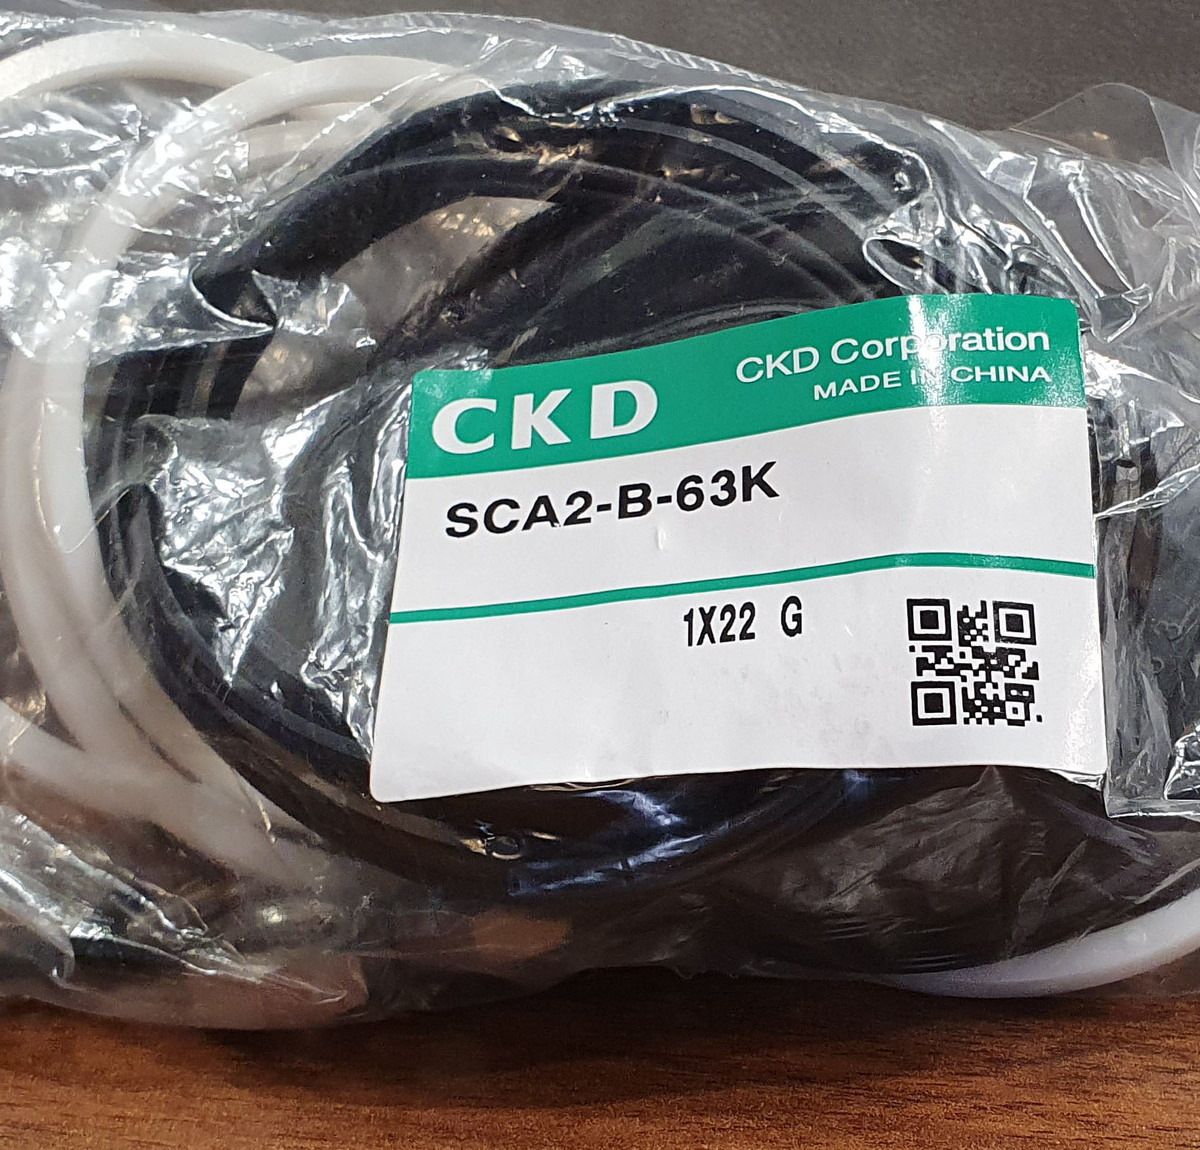 <span style="font-weight: bold;">CKD SCA2-B-63K&nbsp;</span><br>